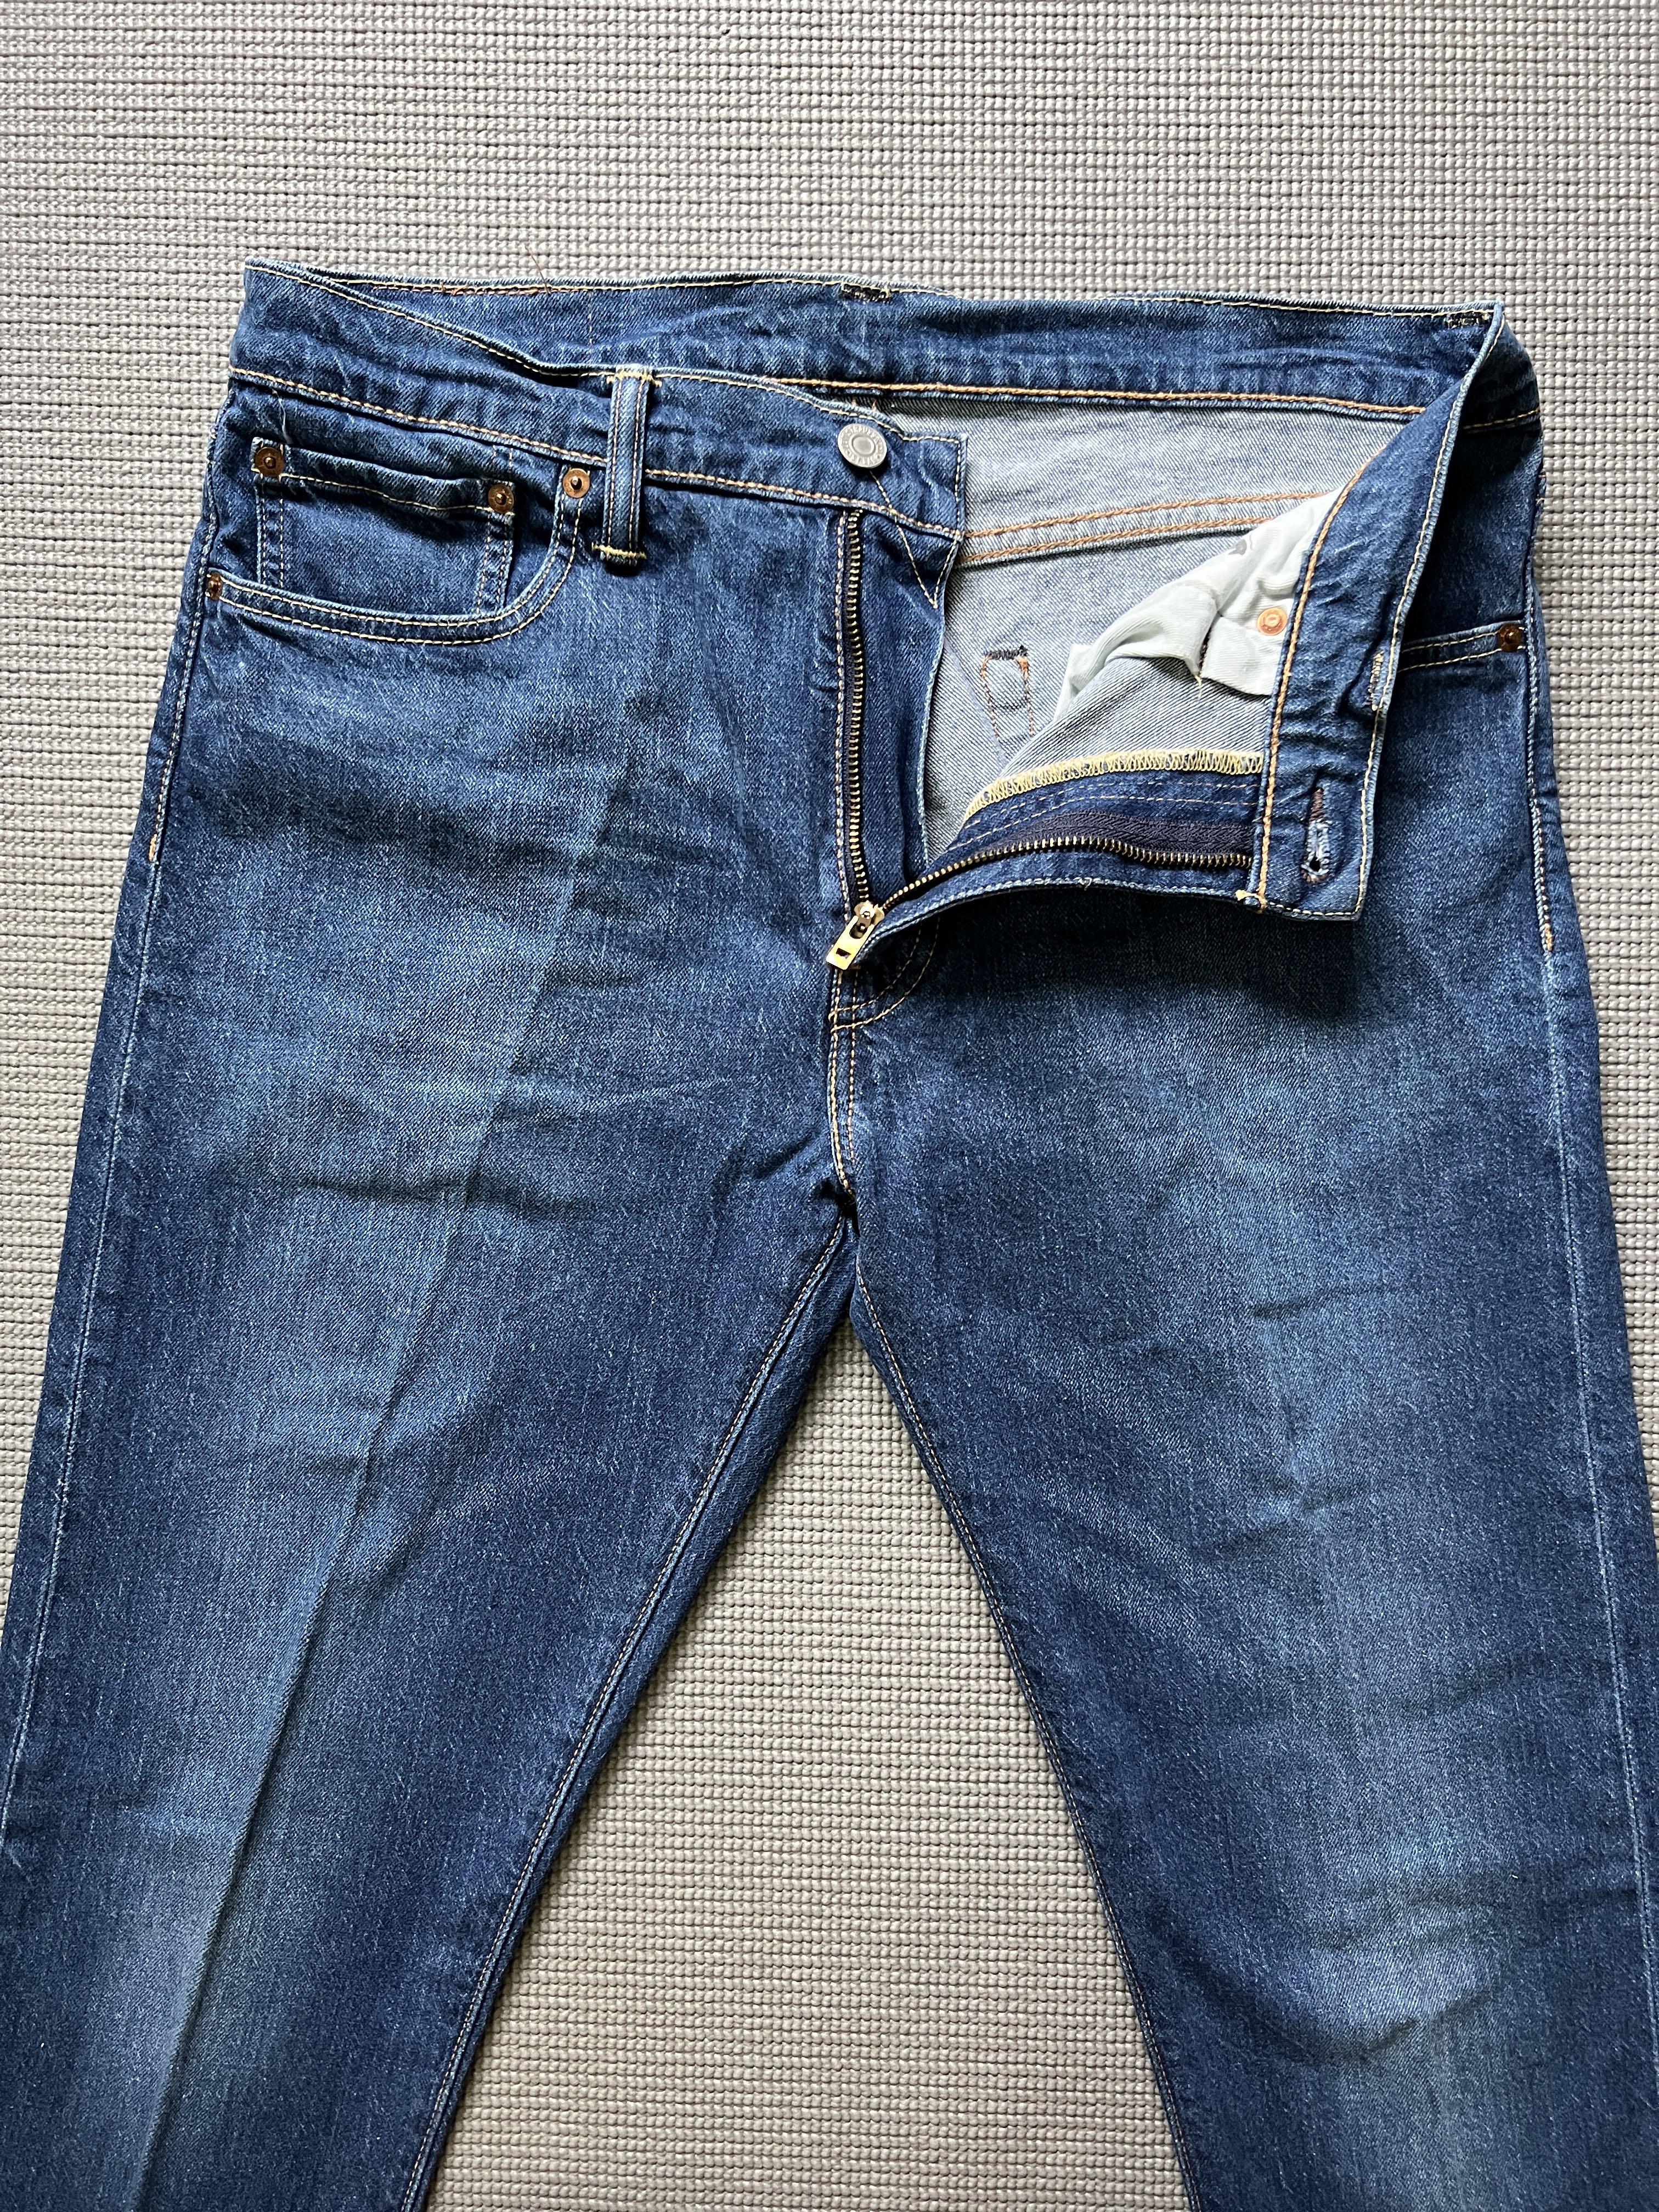 Levi's 512 Denim Jeans 33x32 Skinny Fit Made in Poland, Men's Fashion,  Bottoms, Jeans on Carousell